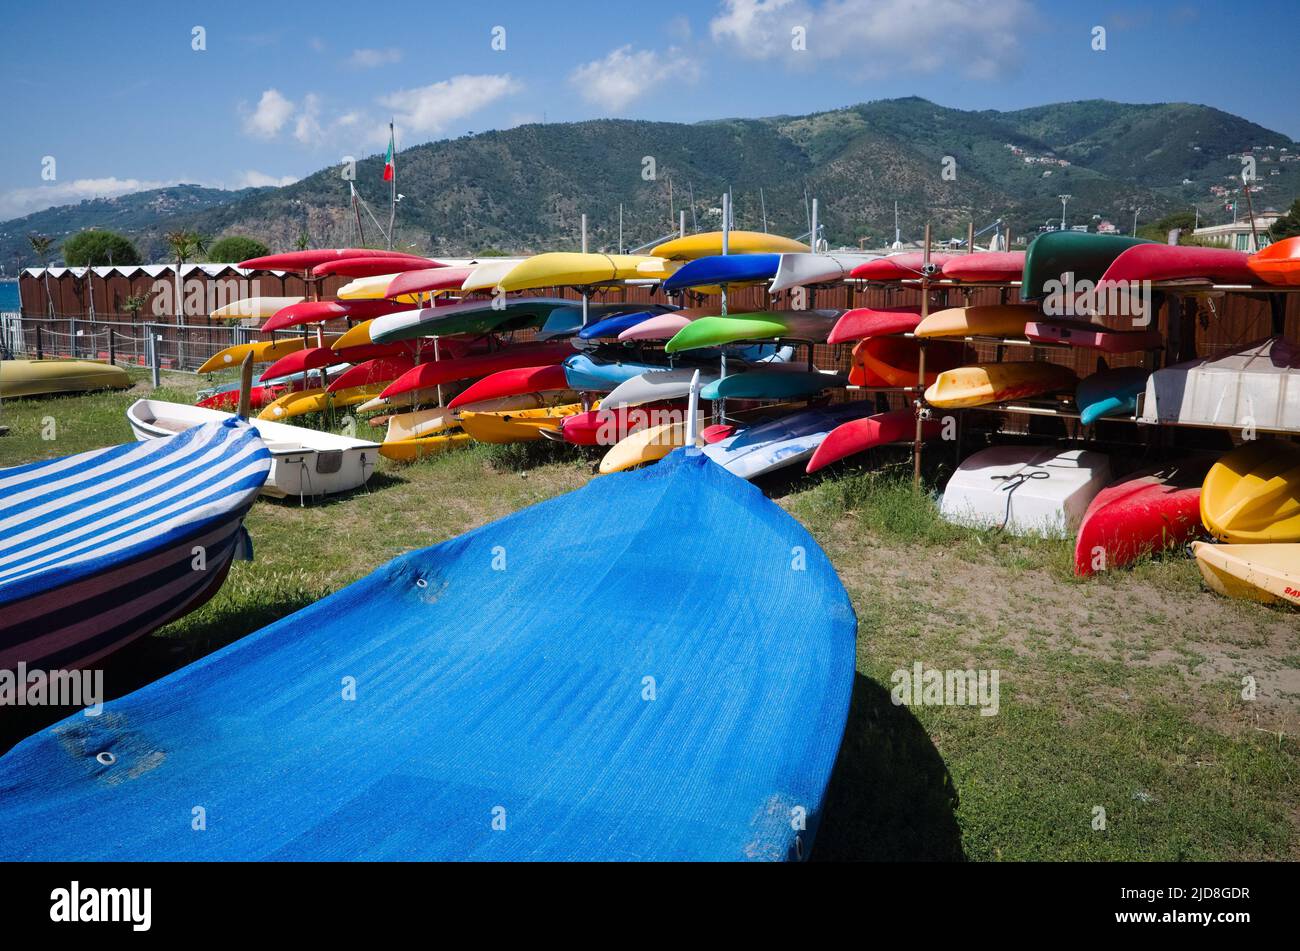 Lots of colorful plastic kayaks lie on storage shelves against mountains on shores of Mediterranean Sea. Small boats in storage Stock Photo